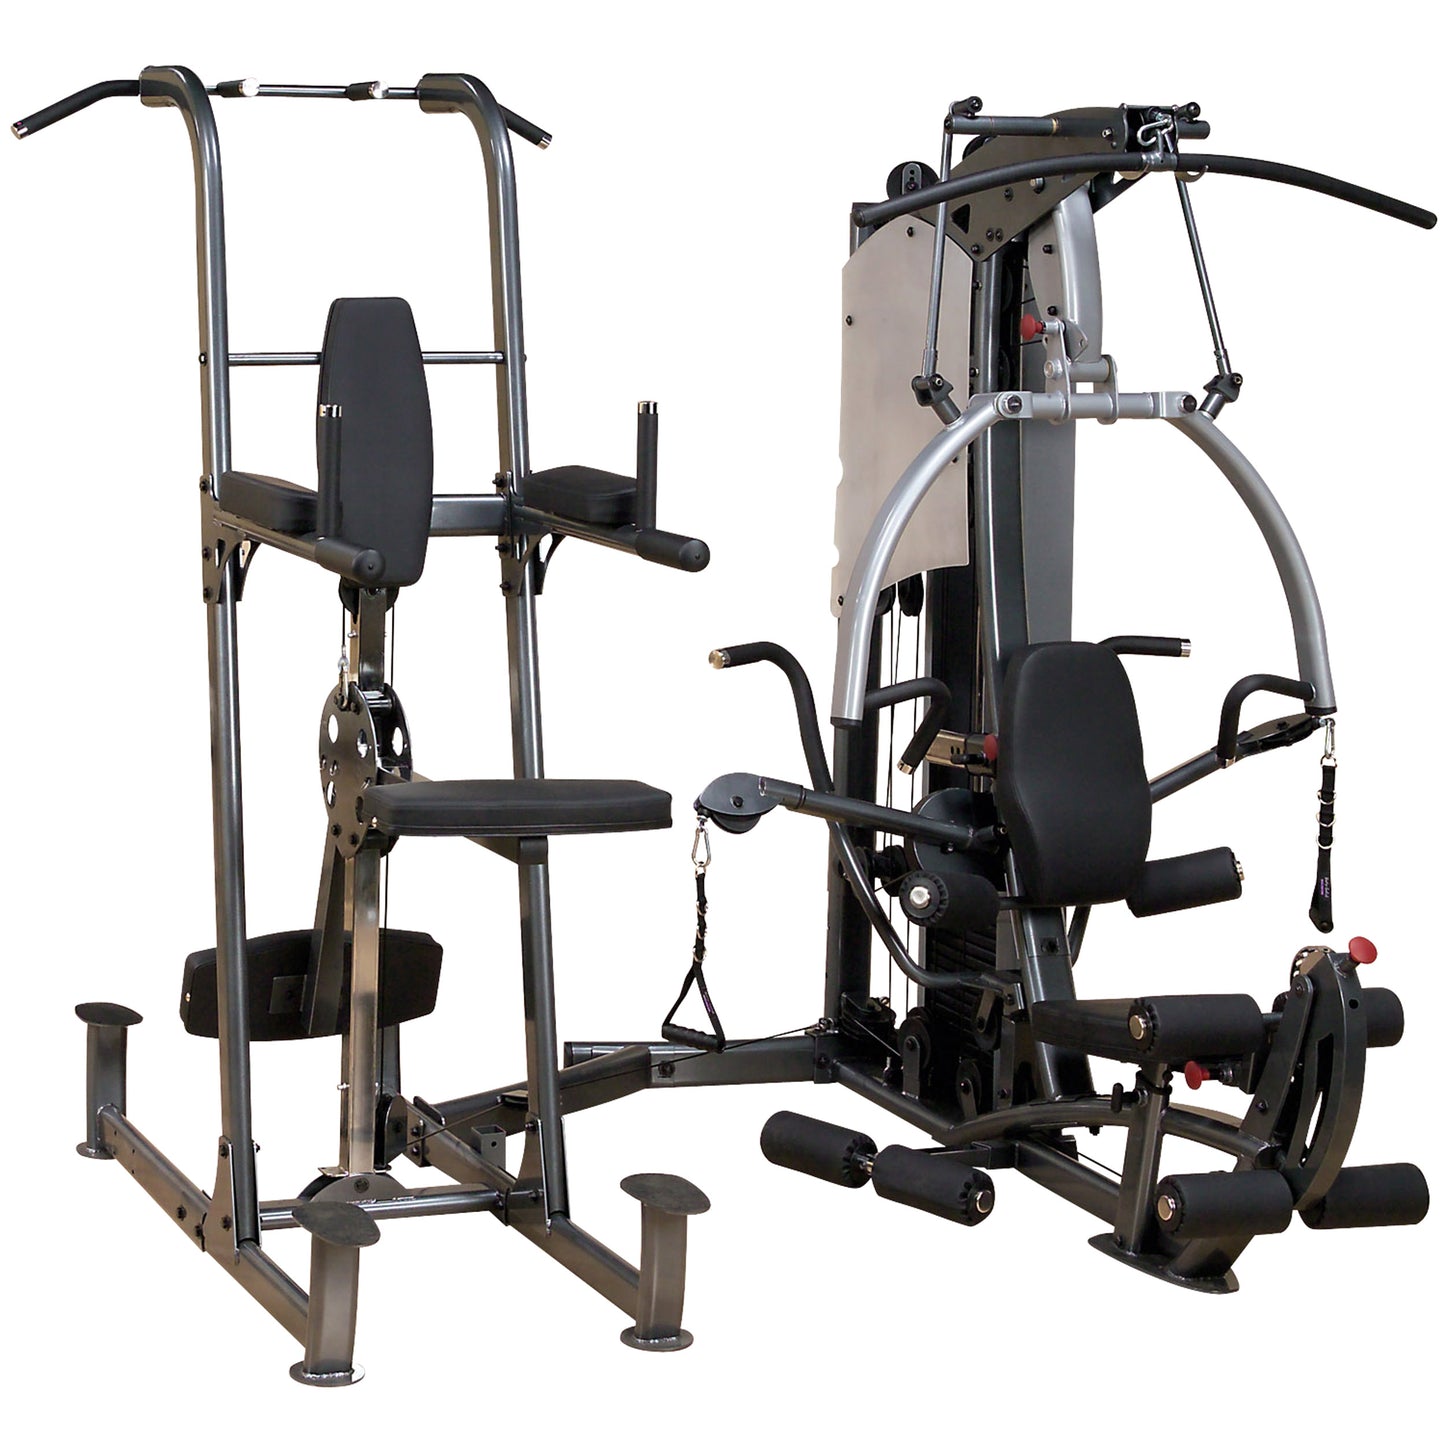 Body-Solid Fusion 600 (F600) Personal Trainer (250 lbs Stack)